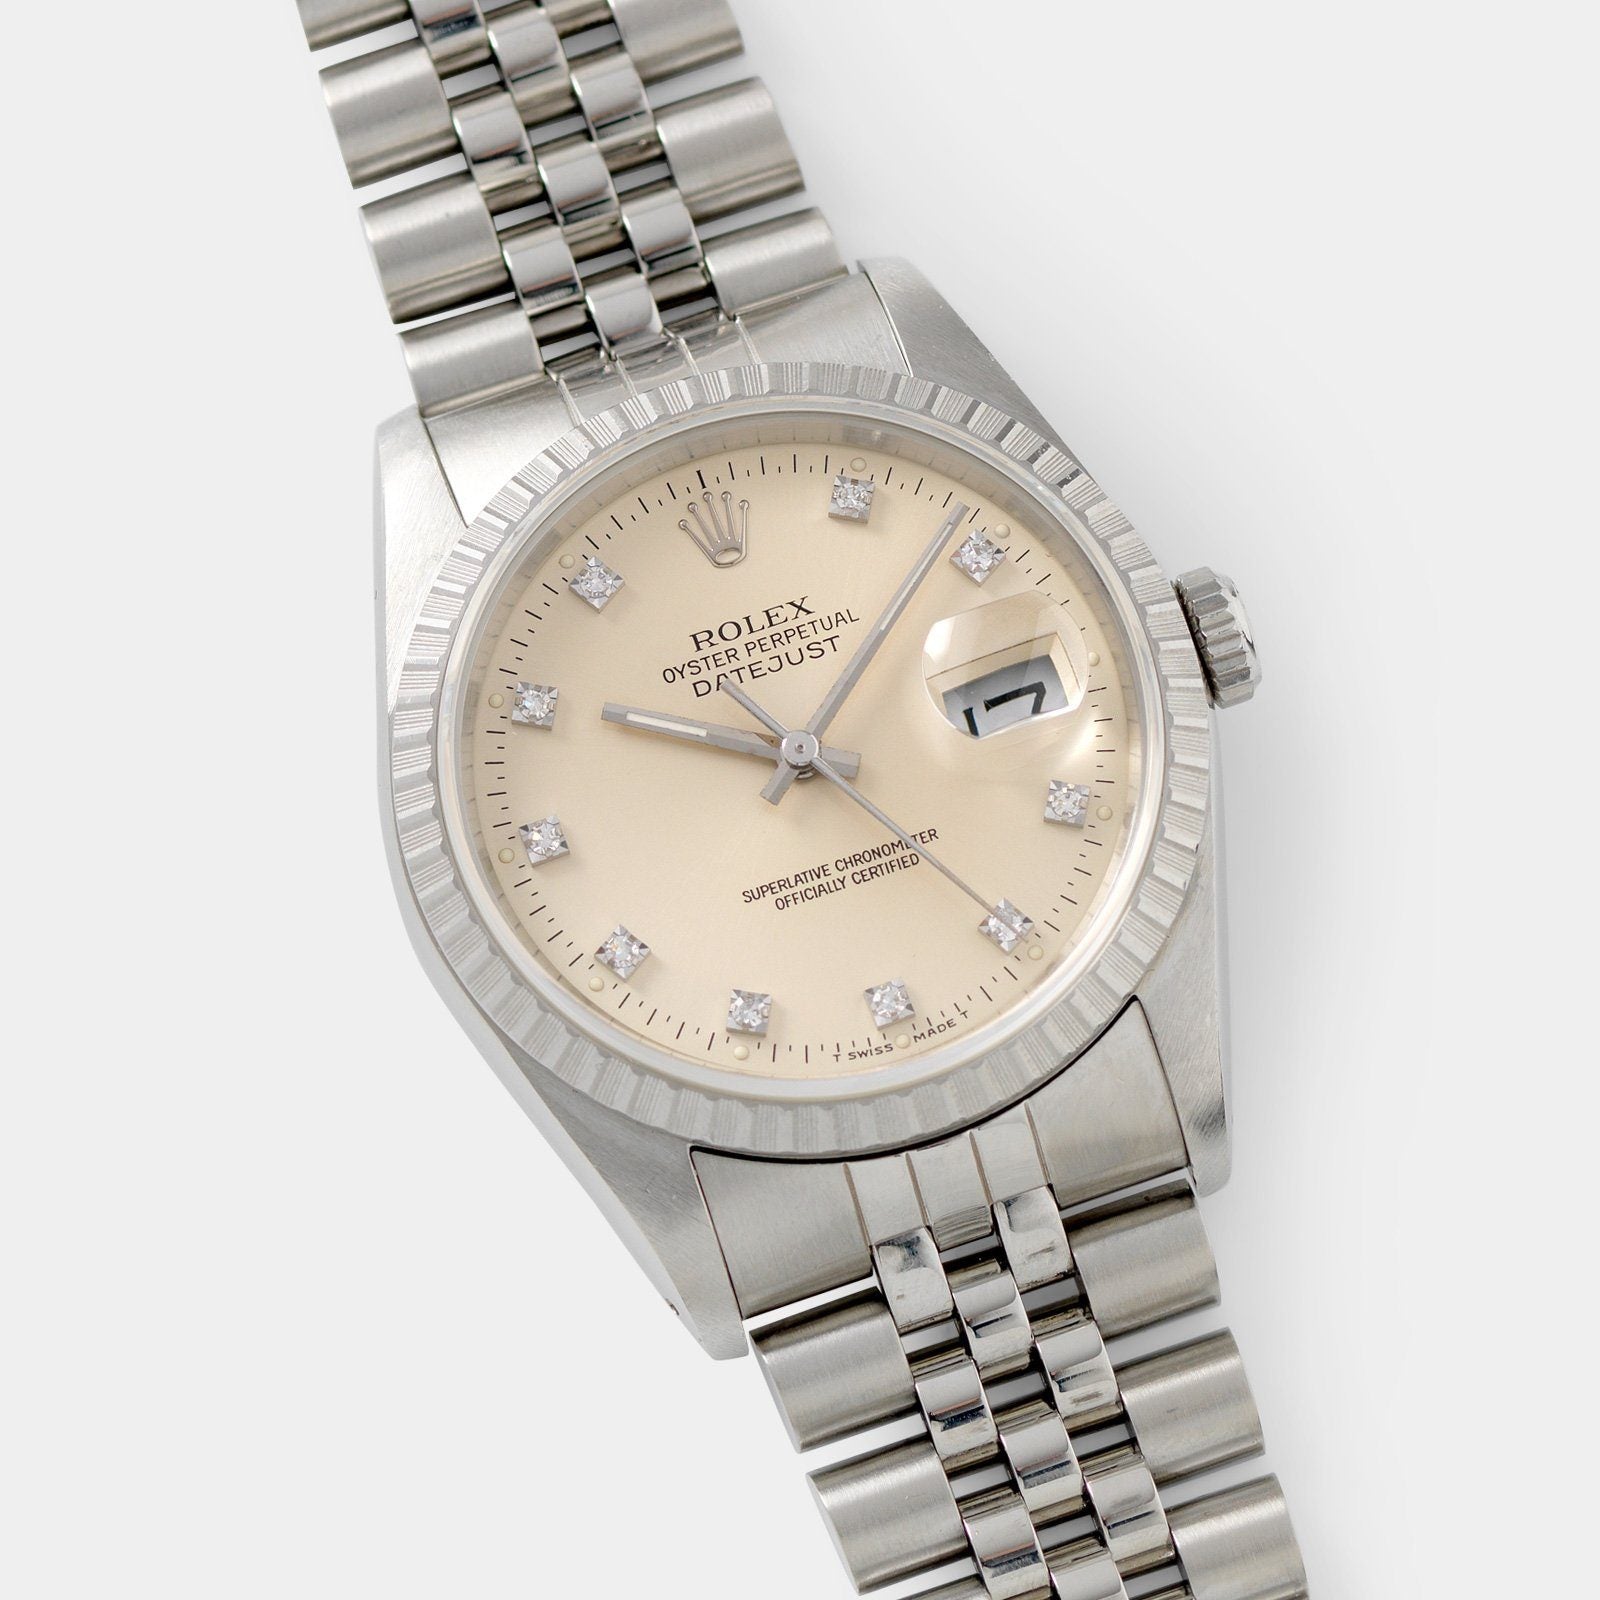 Rolex Datejust Silver Diamond Dial Reference 16220 with og guarantee paper